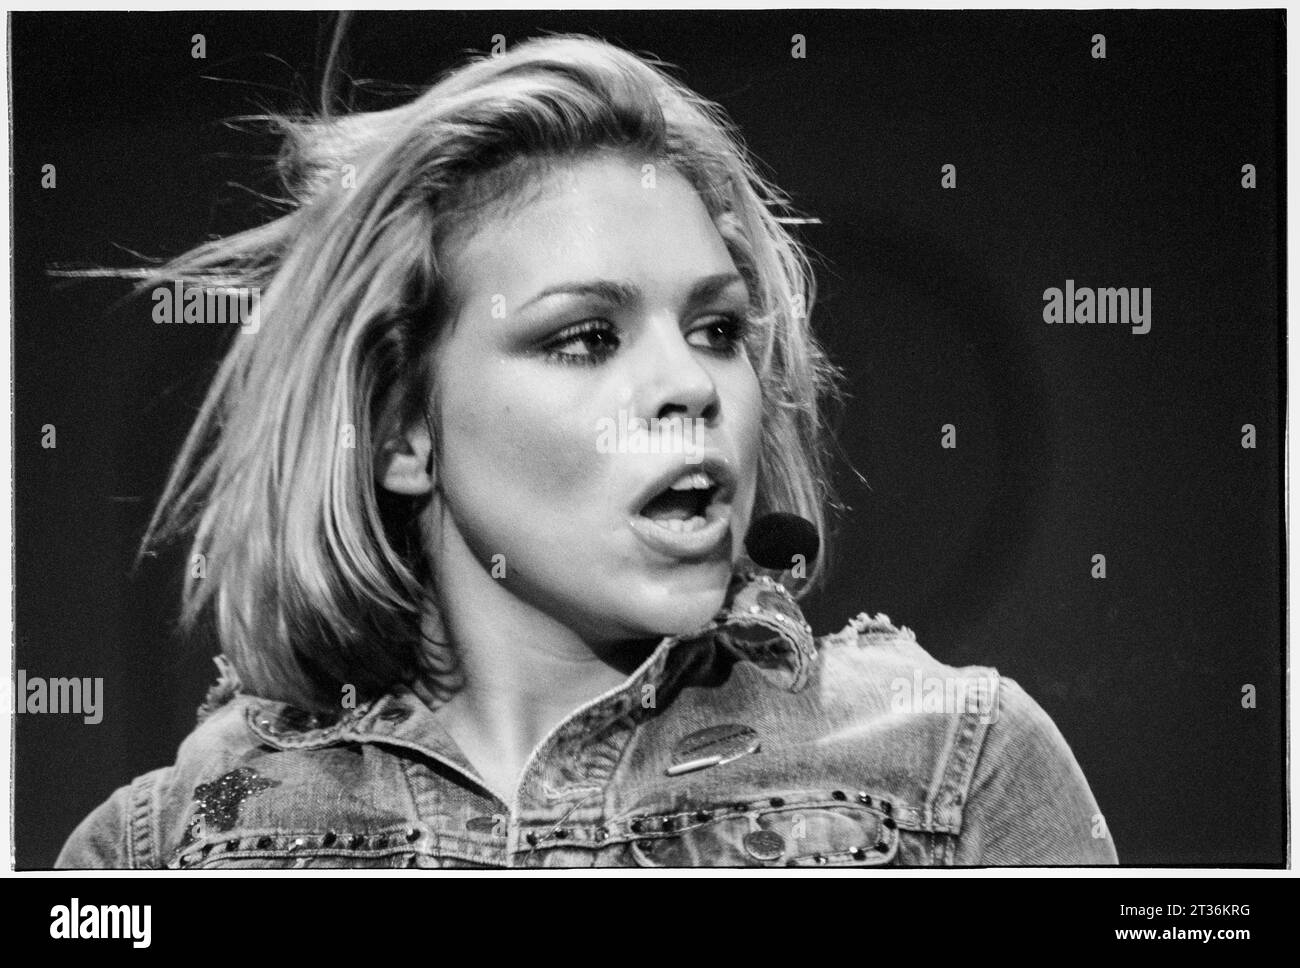 BILLIE PIPER, SINGER, 2000: Billie Piper at 18-years-old on the Smash Hits 2000 Tour playing live at Cardiff International Arena CIA in Cardiff on 30 November 2000. Photograph: Rob Watkins Stock Photo